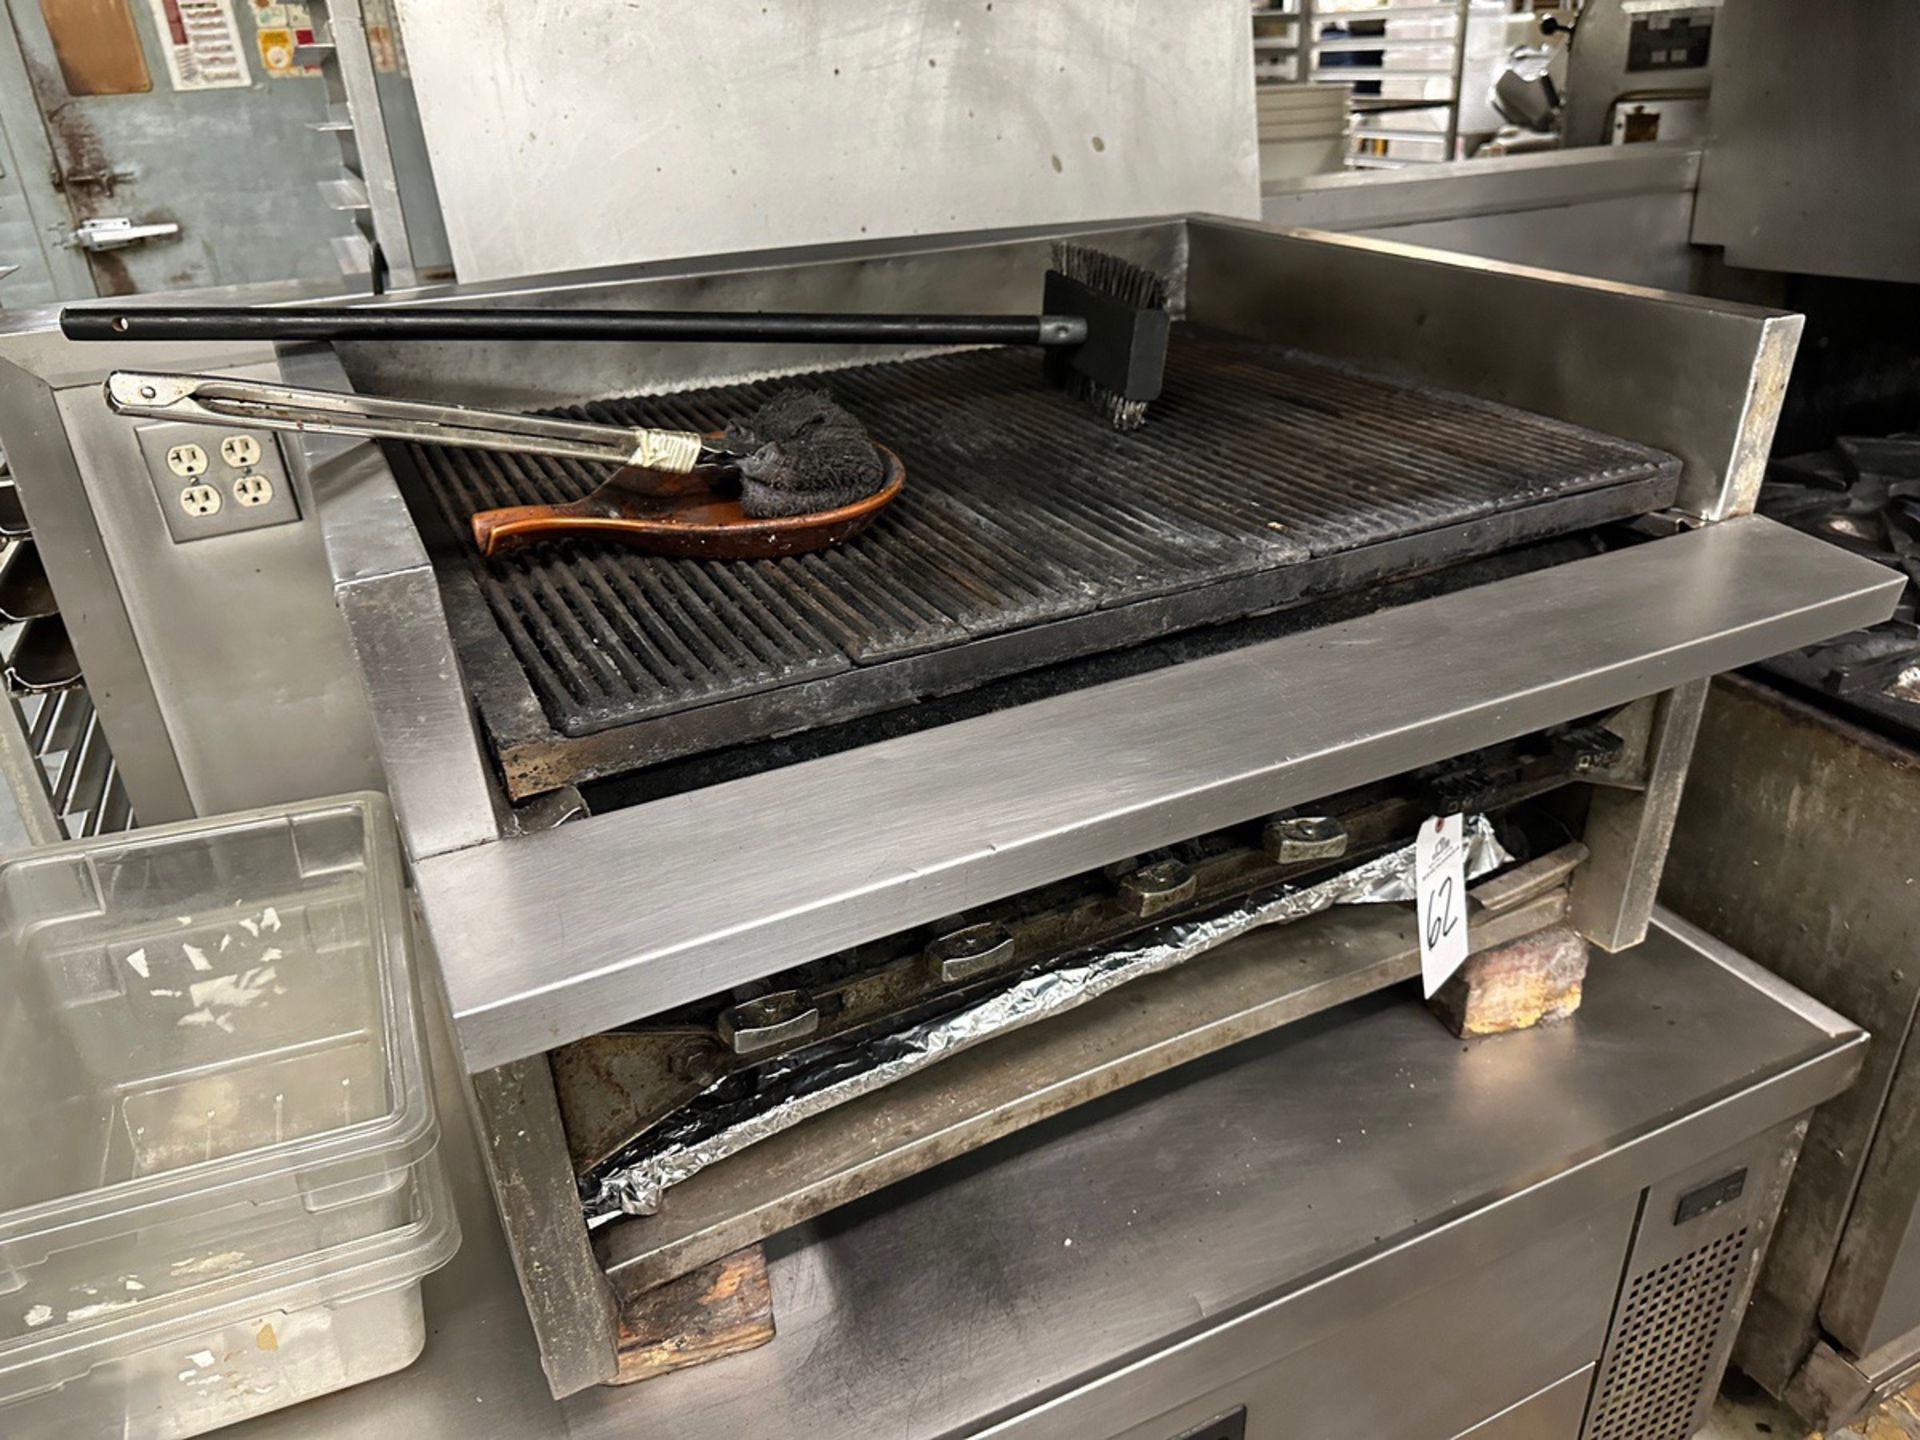 Counter Top Grill - Subj to Bulk | Rig Fee $125